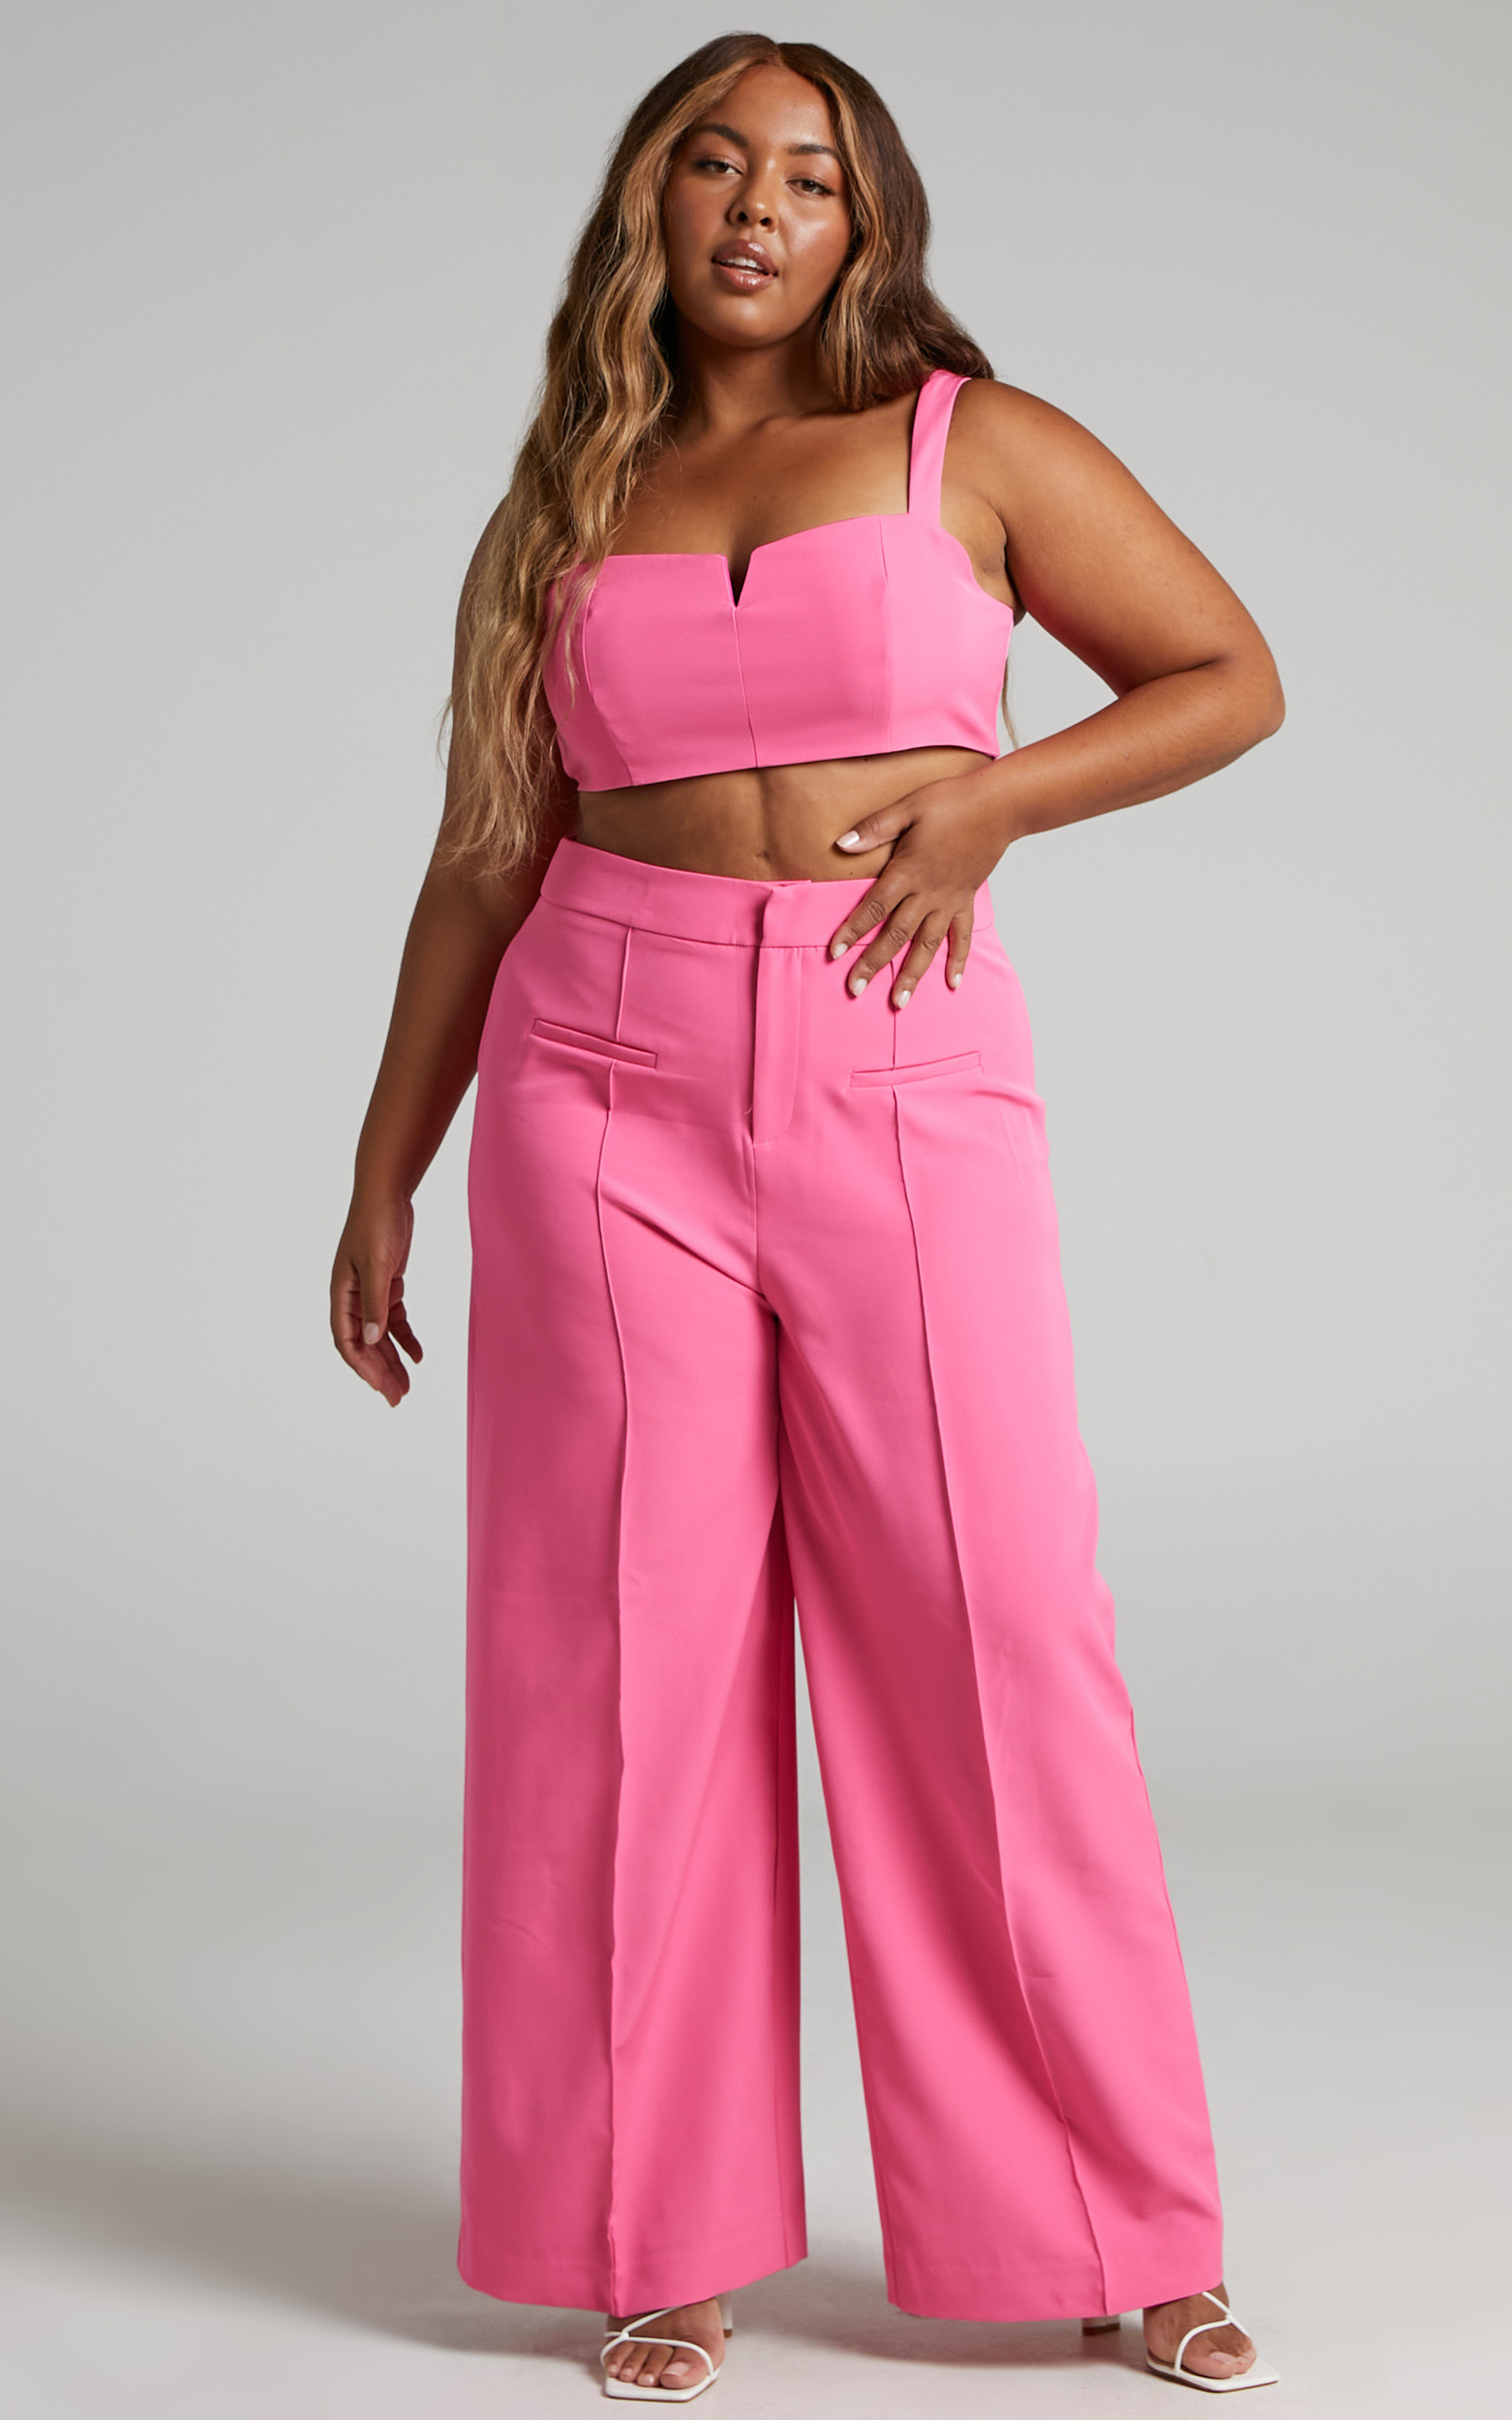 Maida V-Front Crop Top and Wide Leg Pants Two Piece Set in Pink